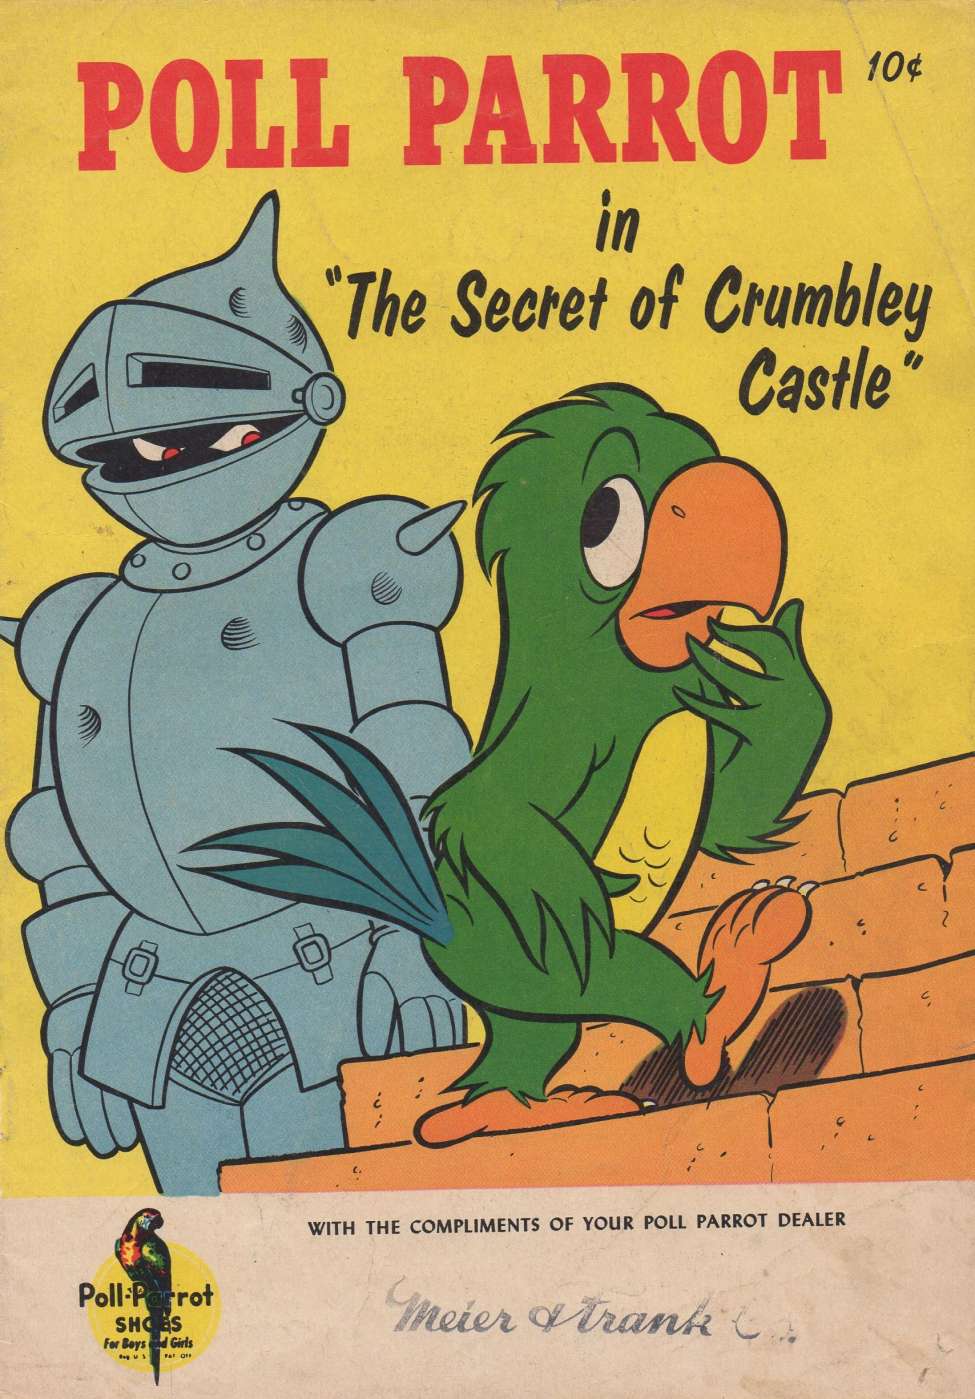 Book Cover For Poll Parrot 2 - The Secret of Crumbley Castle